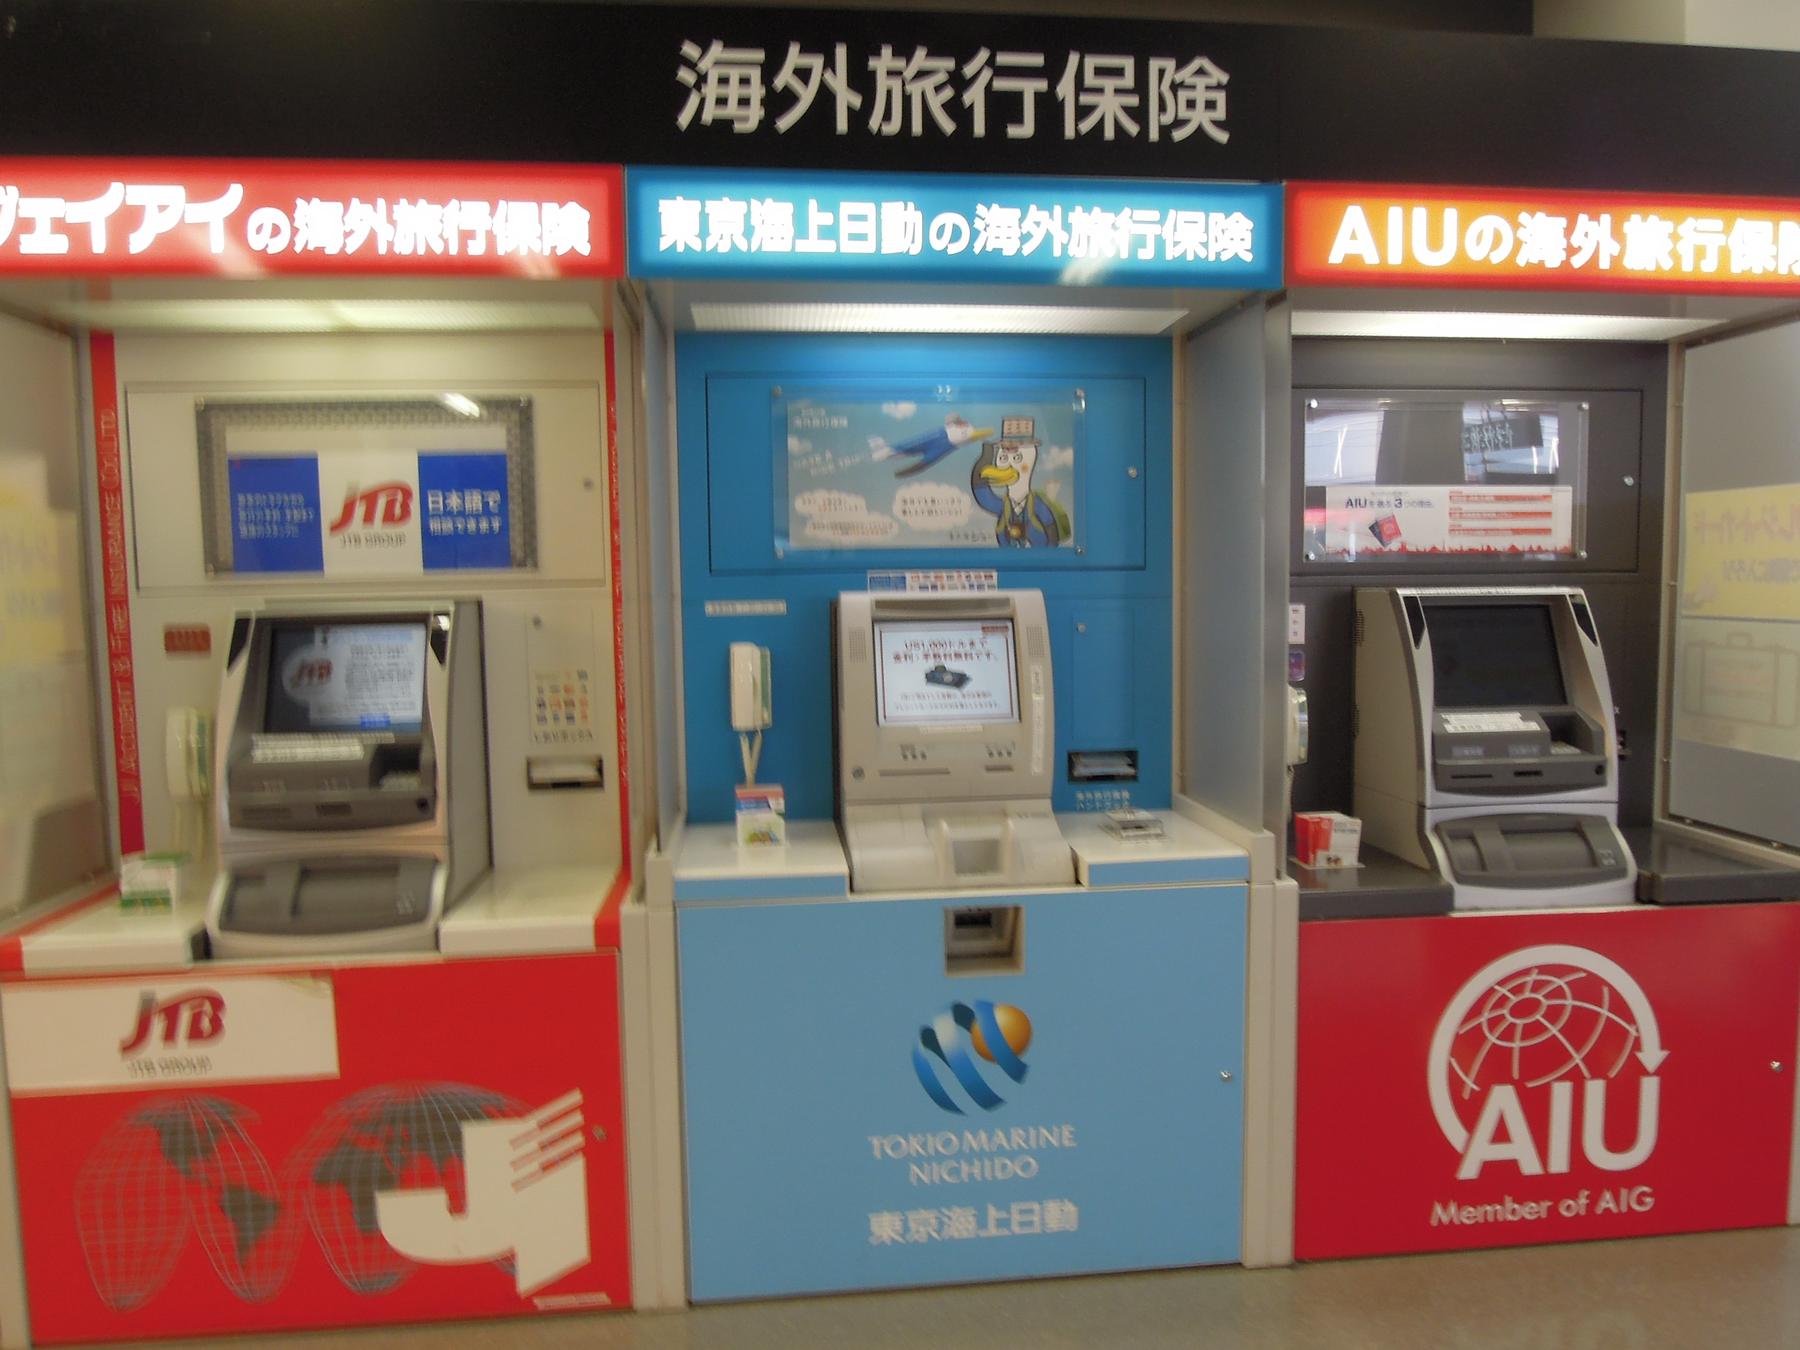 a small machine with a sign that says it is a machine - File:Overseas travel insurance Vending machi